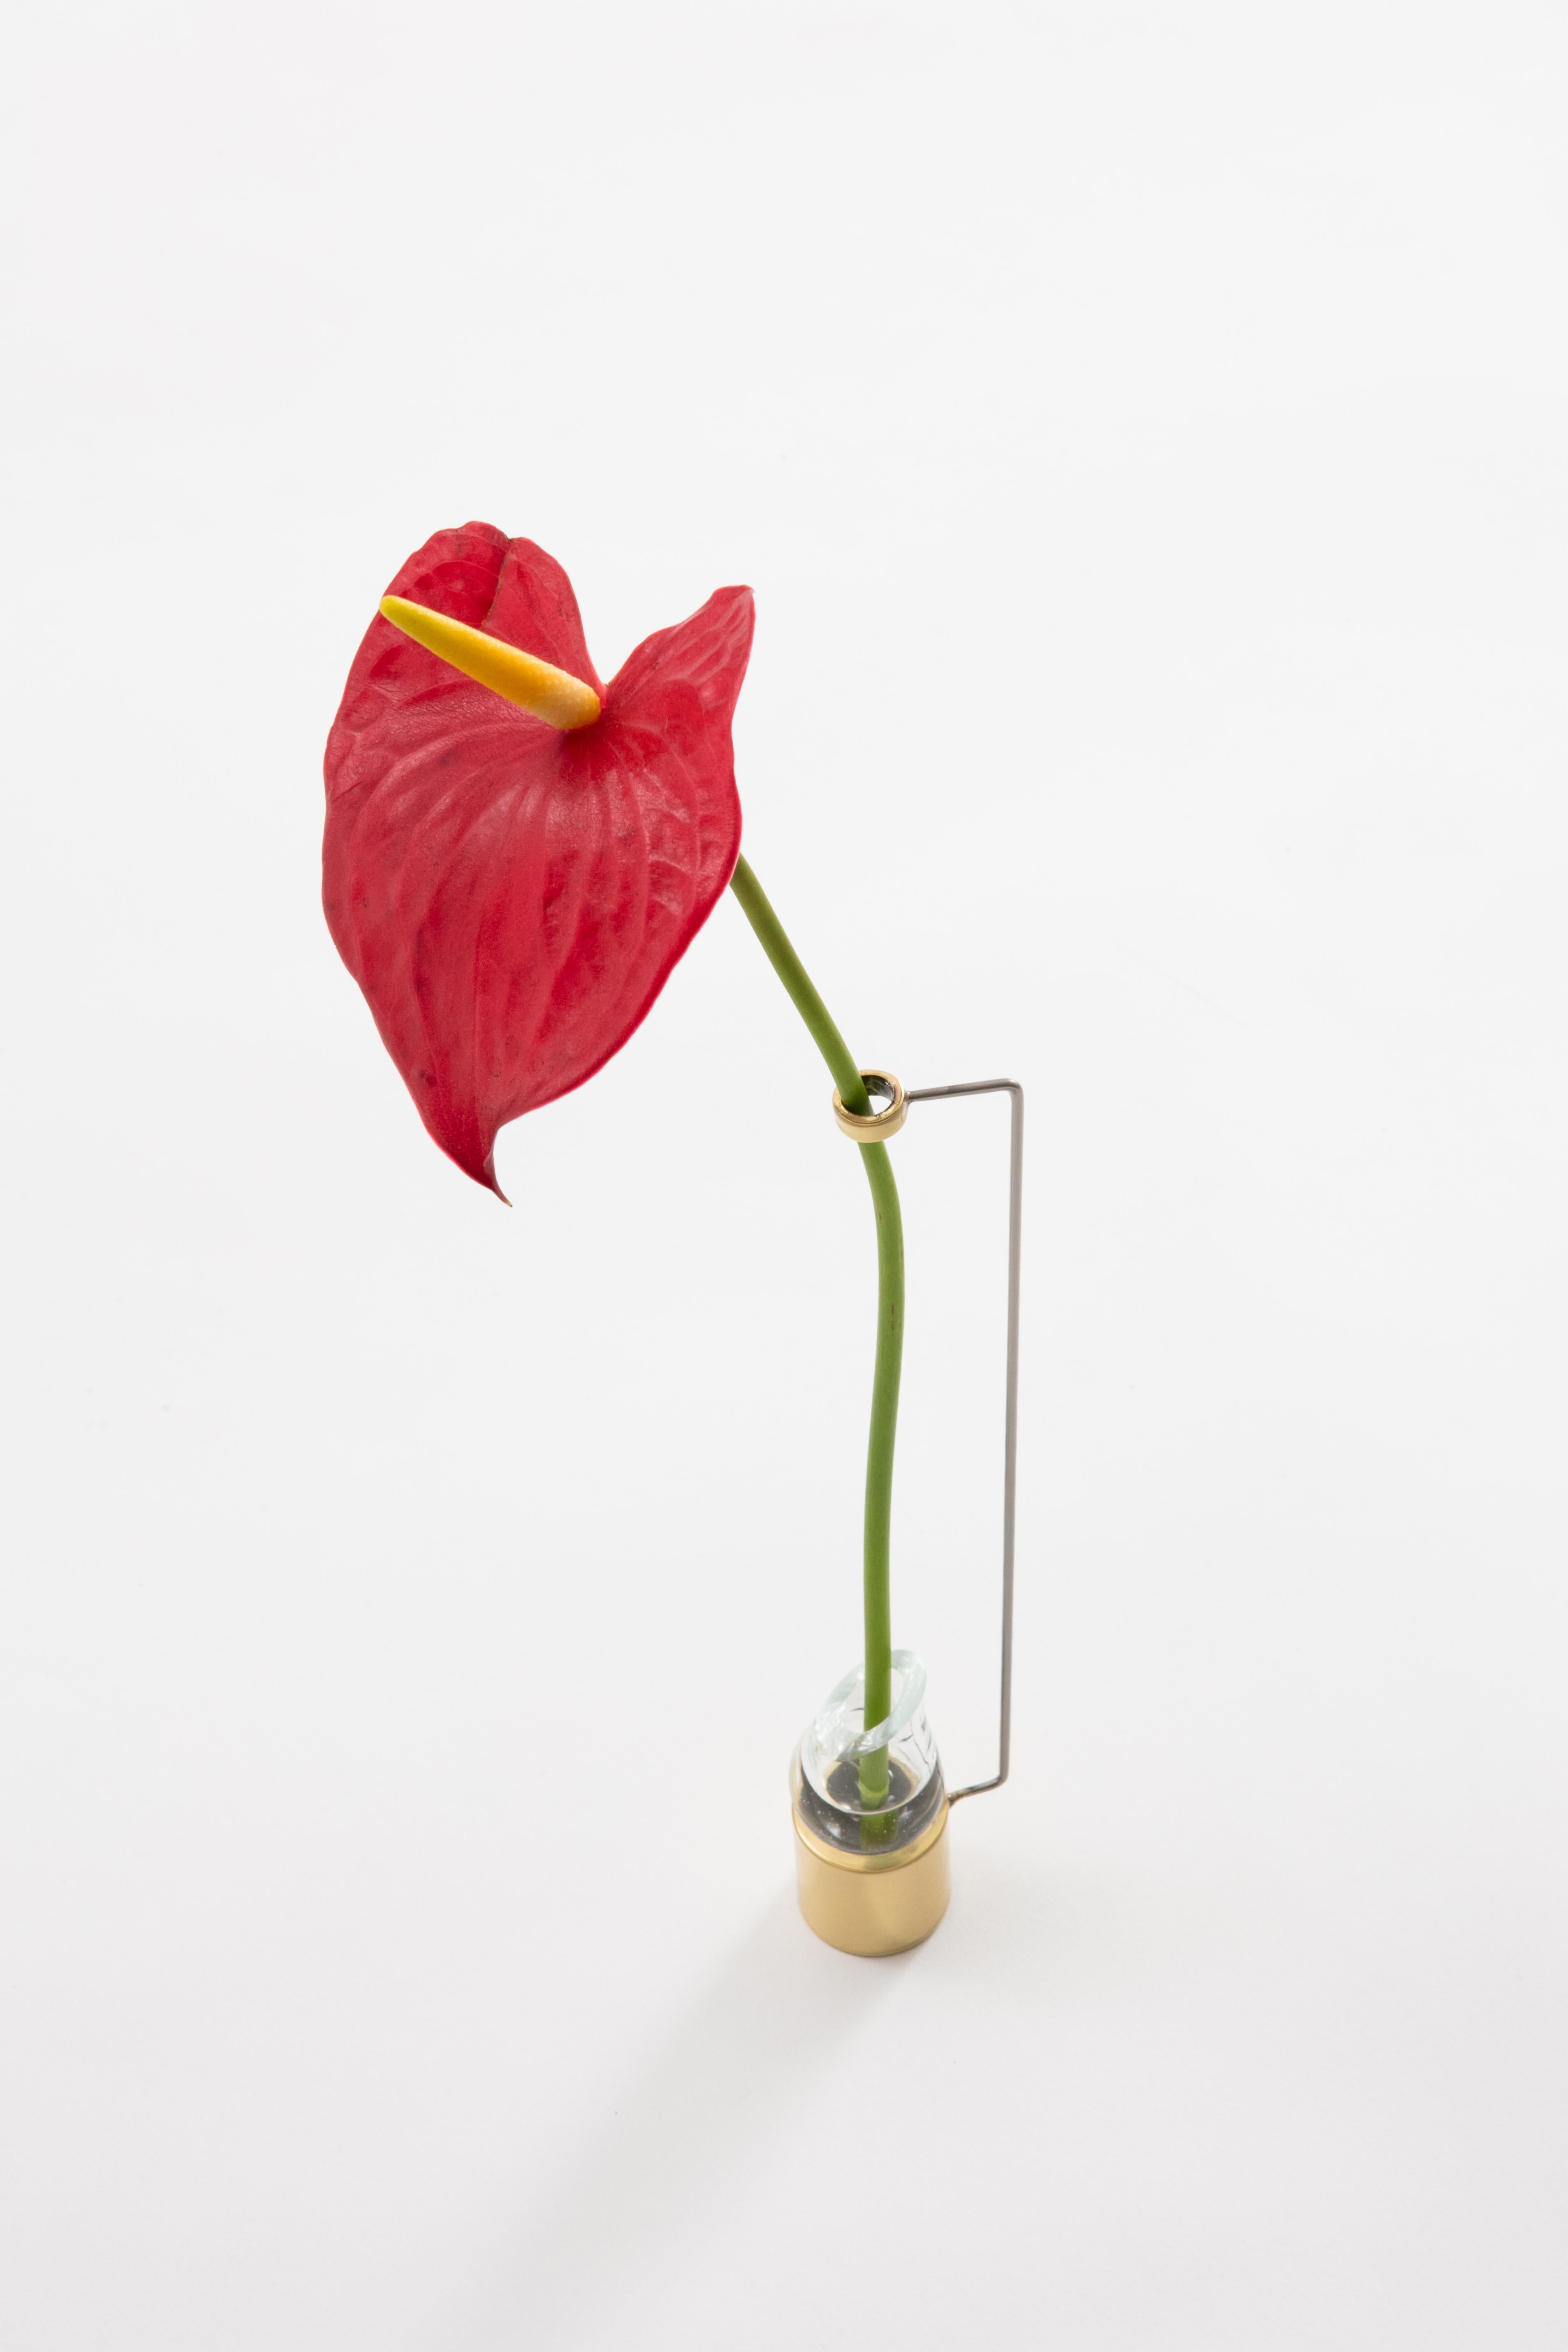 Paulo Goldstein's Piccolo vase, Brazilian contemporary design is part of a series of vases that are inspired in the observation of the natural lines of the flowers and leaves held in them, where the lines of the vases were designed to enhance and